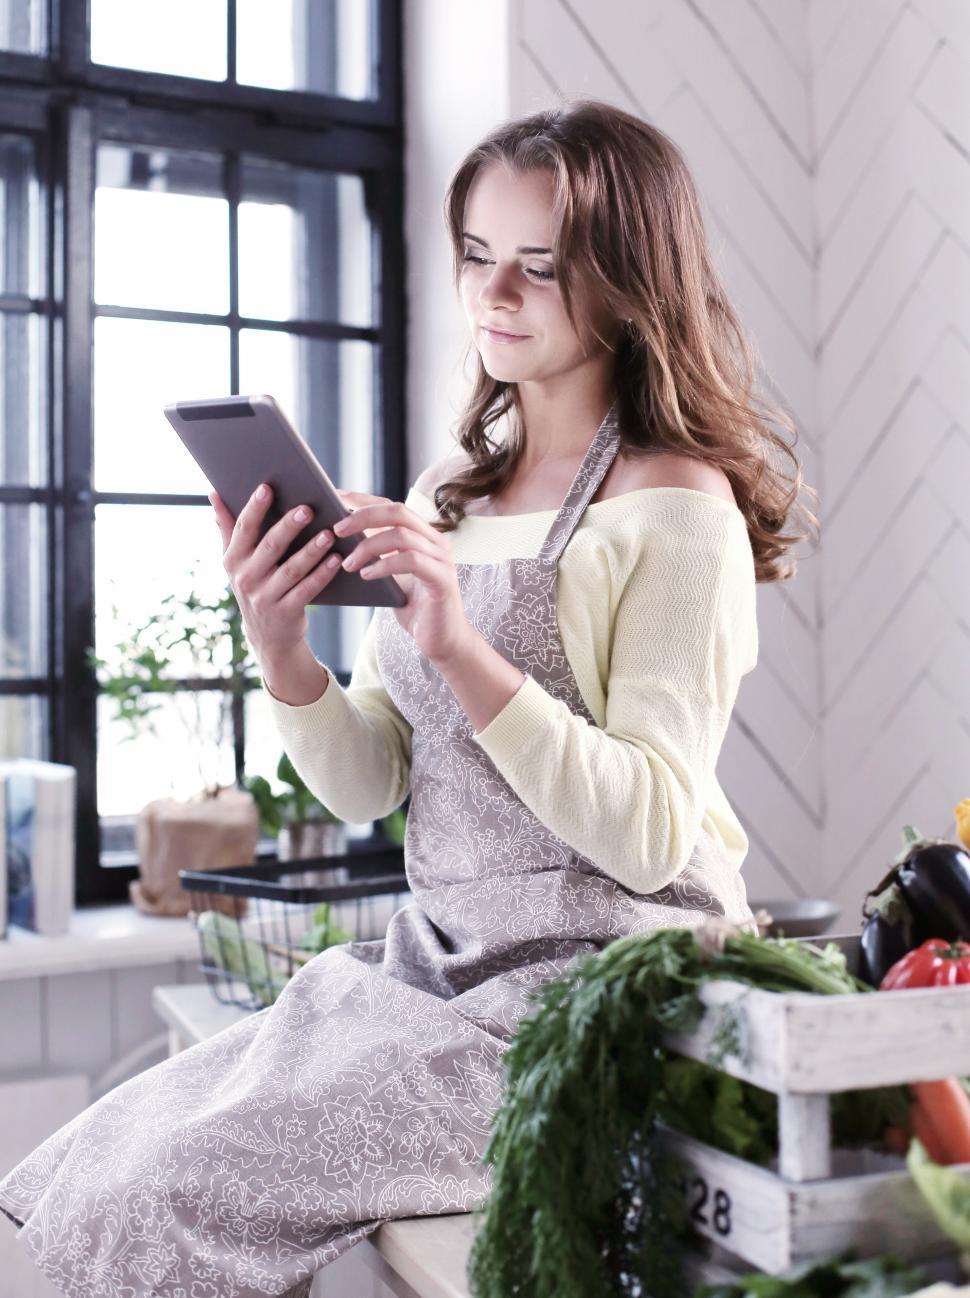 Free Image of Woman looking at tablet device in the kitchen 